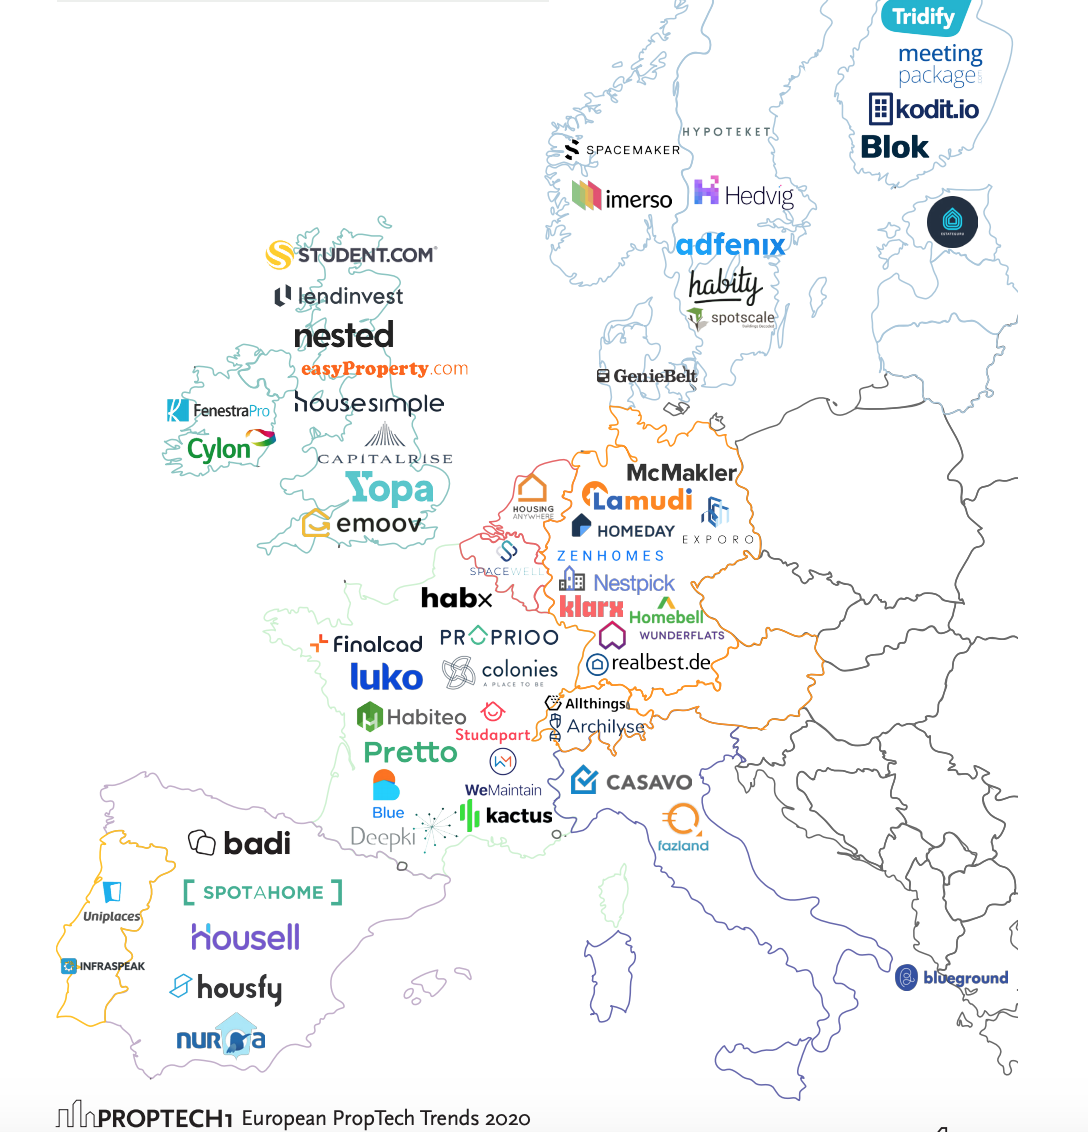 Best-funded proptech startups, European Proptech Trends 2020, Proptech1 Ventures, February 2020